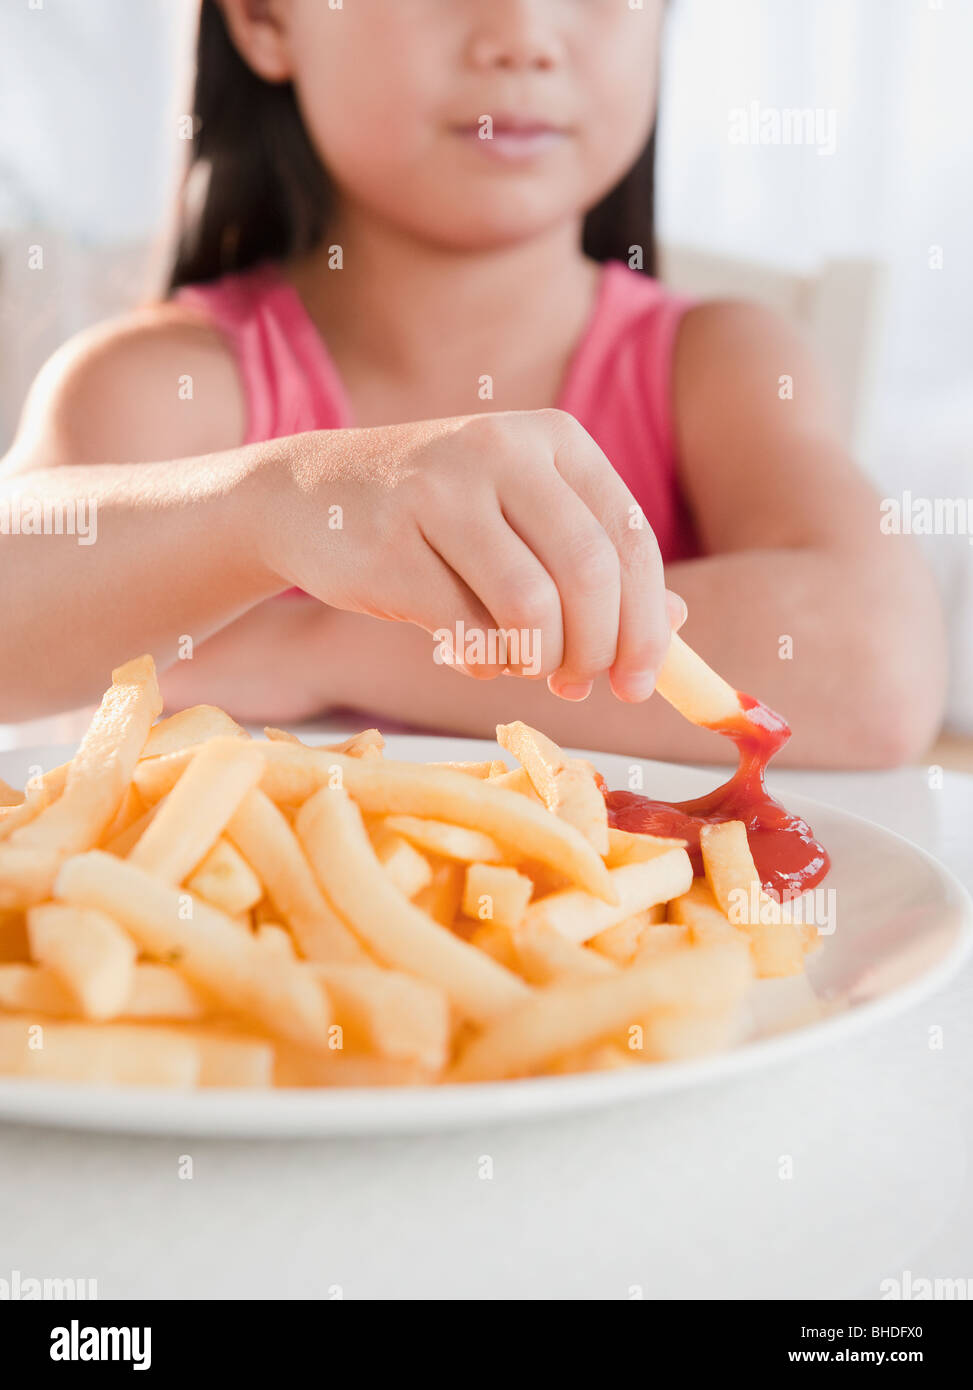 Mixed race girl eating French fries and ketchup Stock Photo